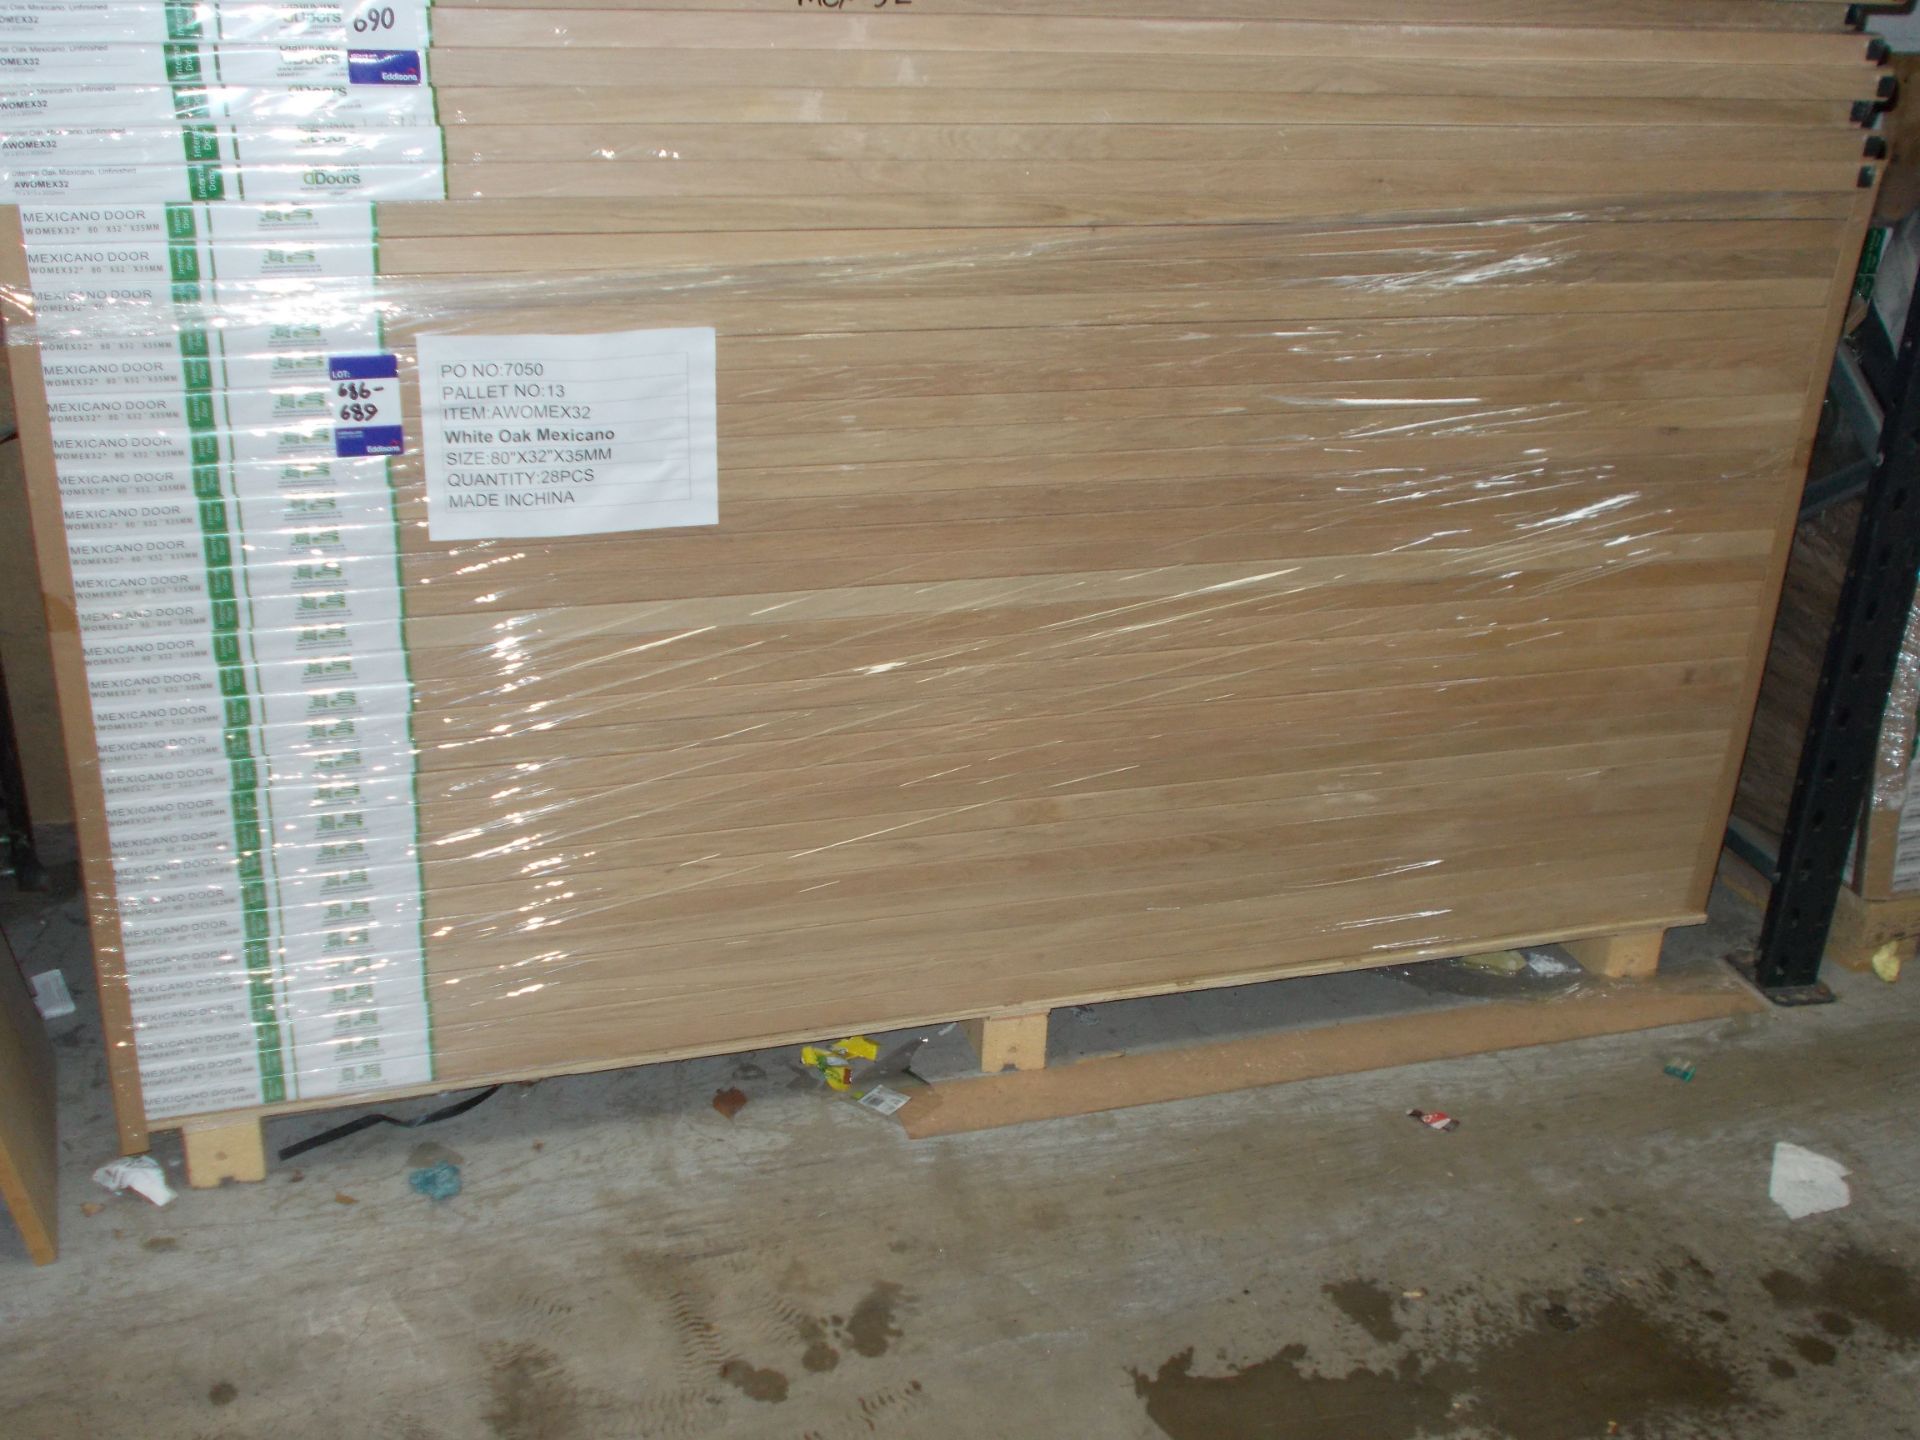 7 x White Oak Mexicano Door AWOMEX32 80”x32”x35mm - Lots to be handed out in order they are stacked, - Image 2 of 3